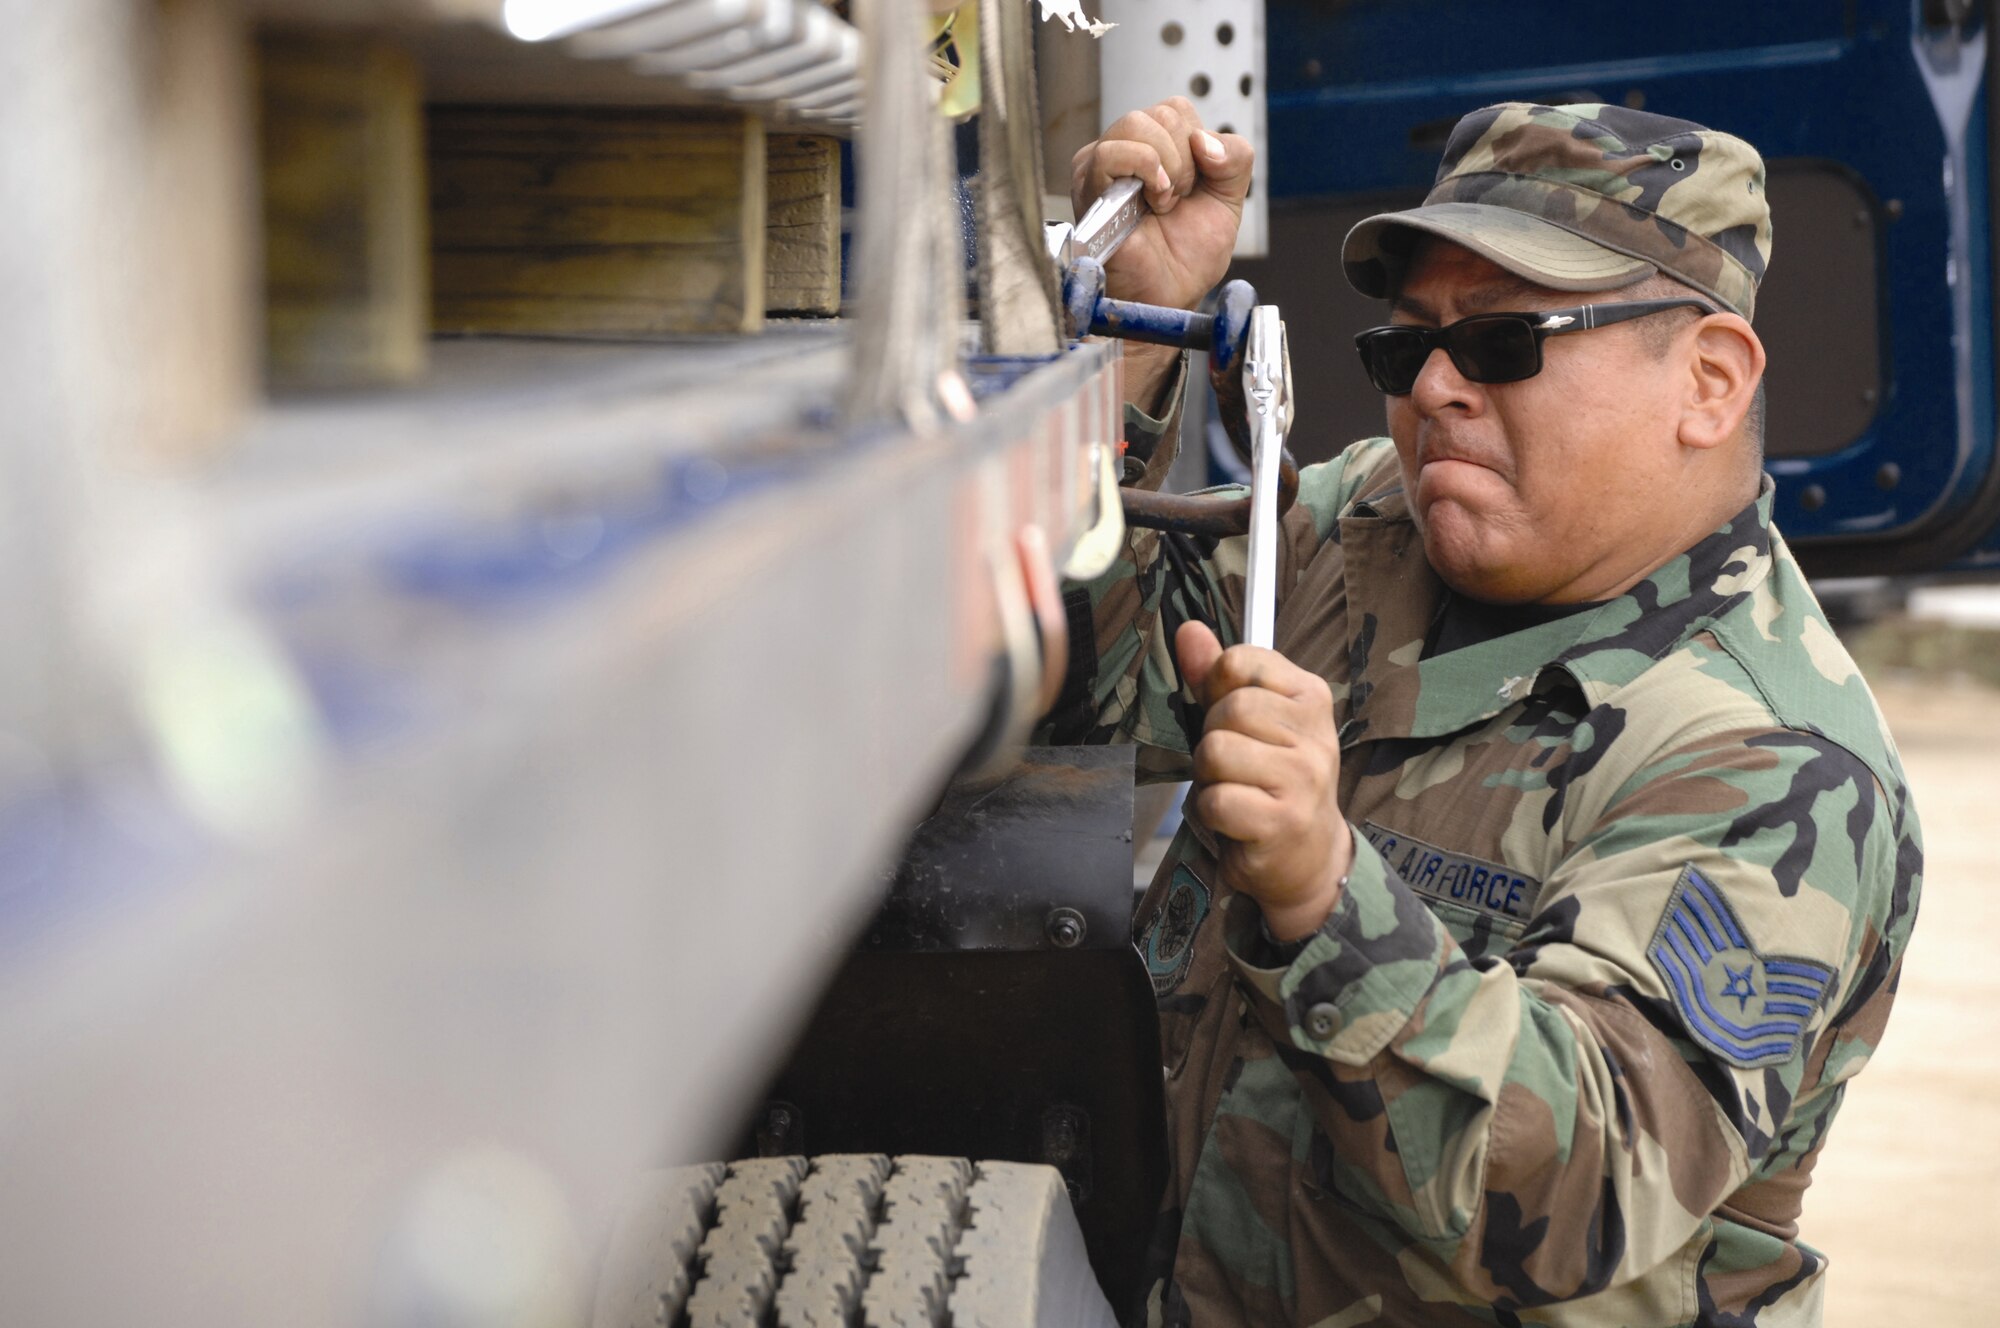 Tech. Sgt. Raul Macias, along with other 163rd Reconnaissance Wing members, tears down and packs up equipment used for the tent city  in Vista, Calif., at the North County Courthouse on November 6. The site was used for the relief efforts of the San Diego Wildfires. (U.S. Air Force photo by Staff Sergeant Diane Ducat )